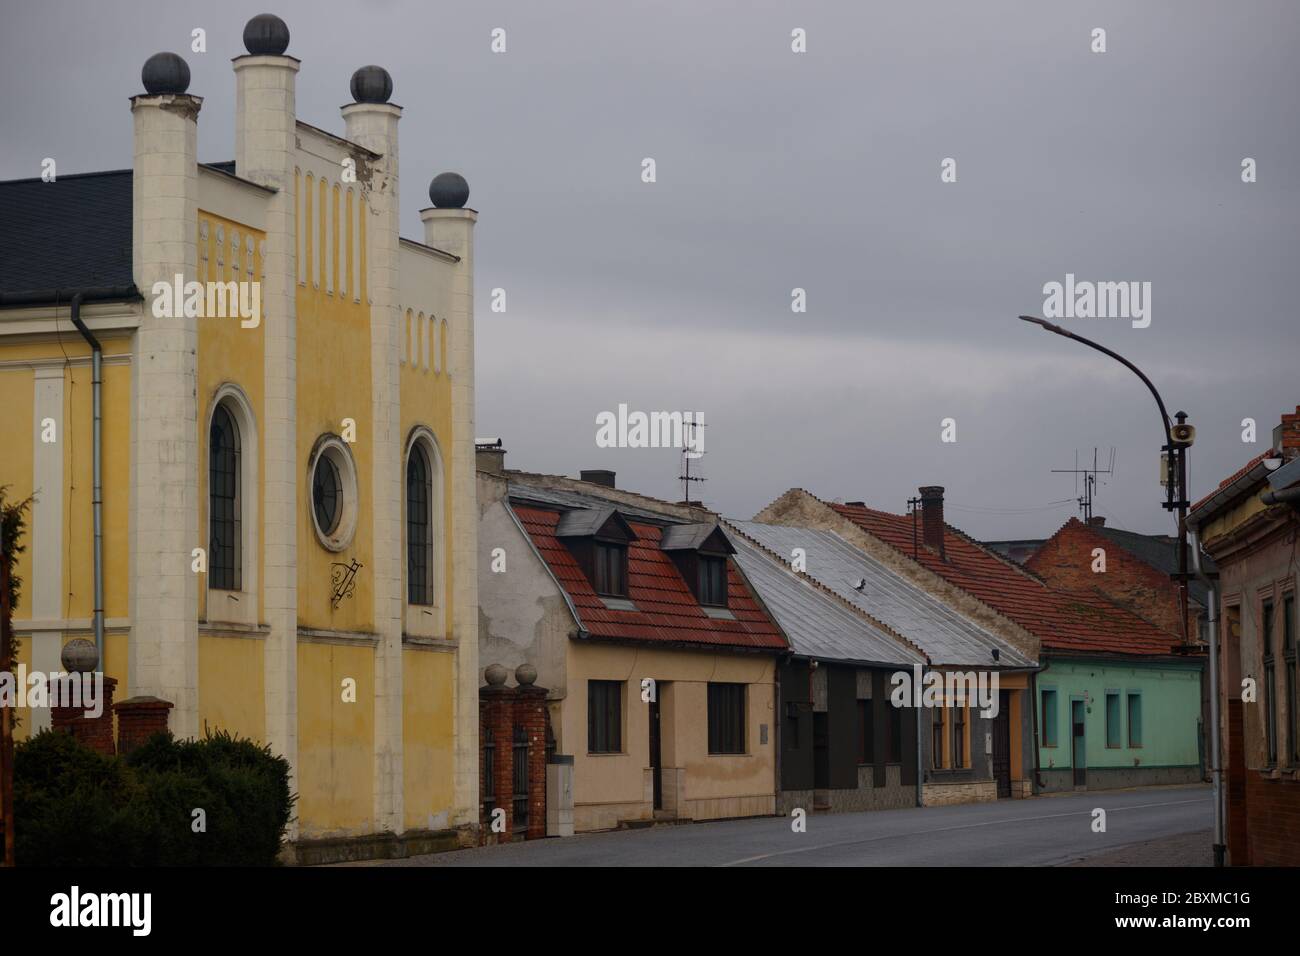 glimpse of a small village within Slovakia Stock Photo